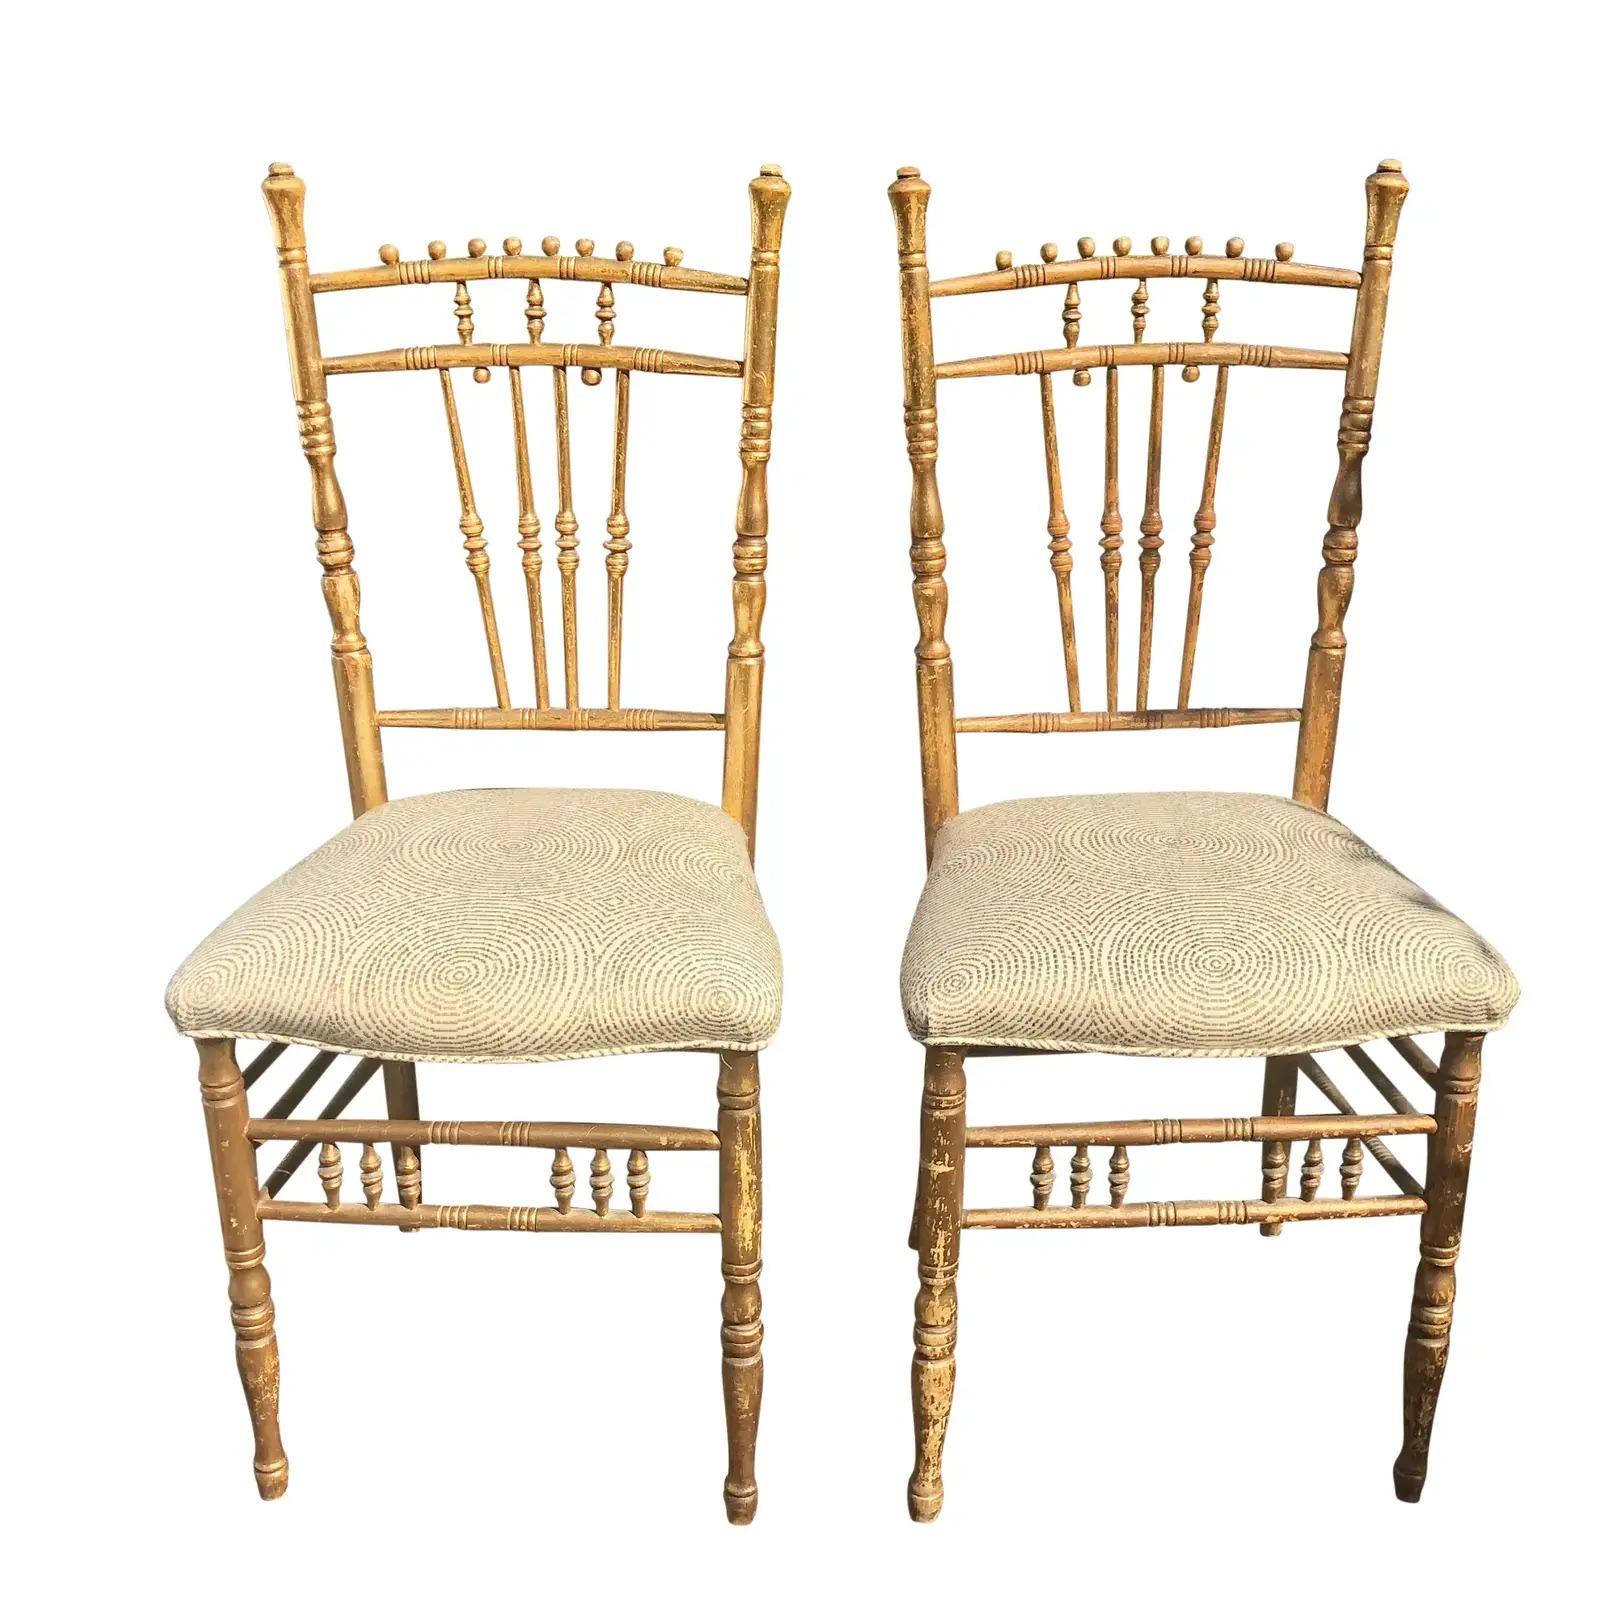 Pair of Antique Regency Style Side Chairs, Late 19th Century For Sale 3